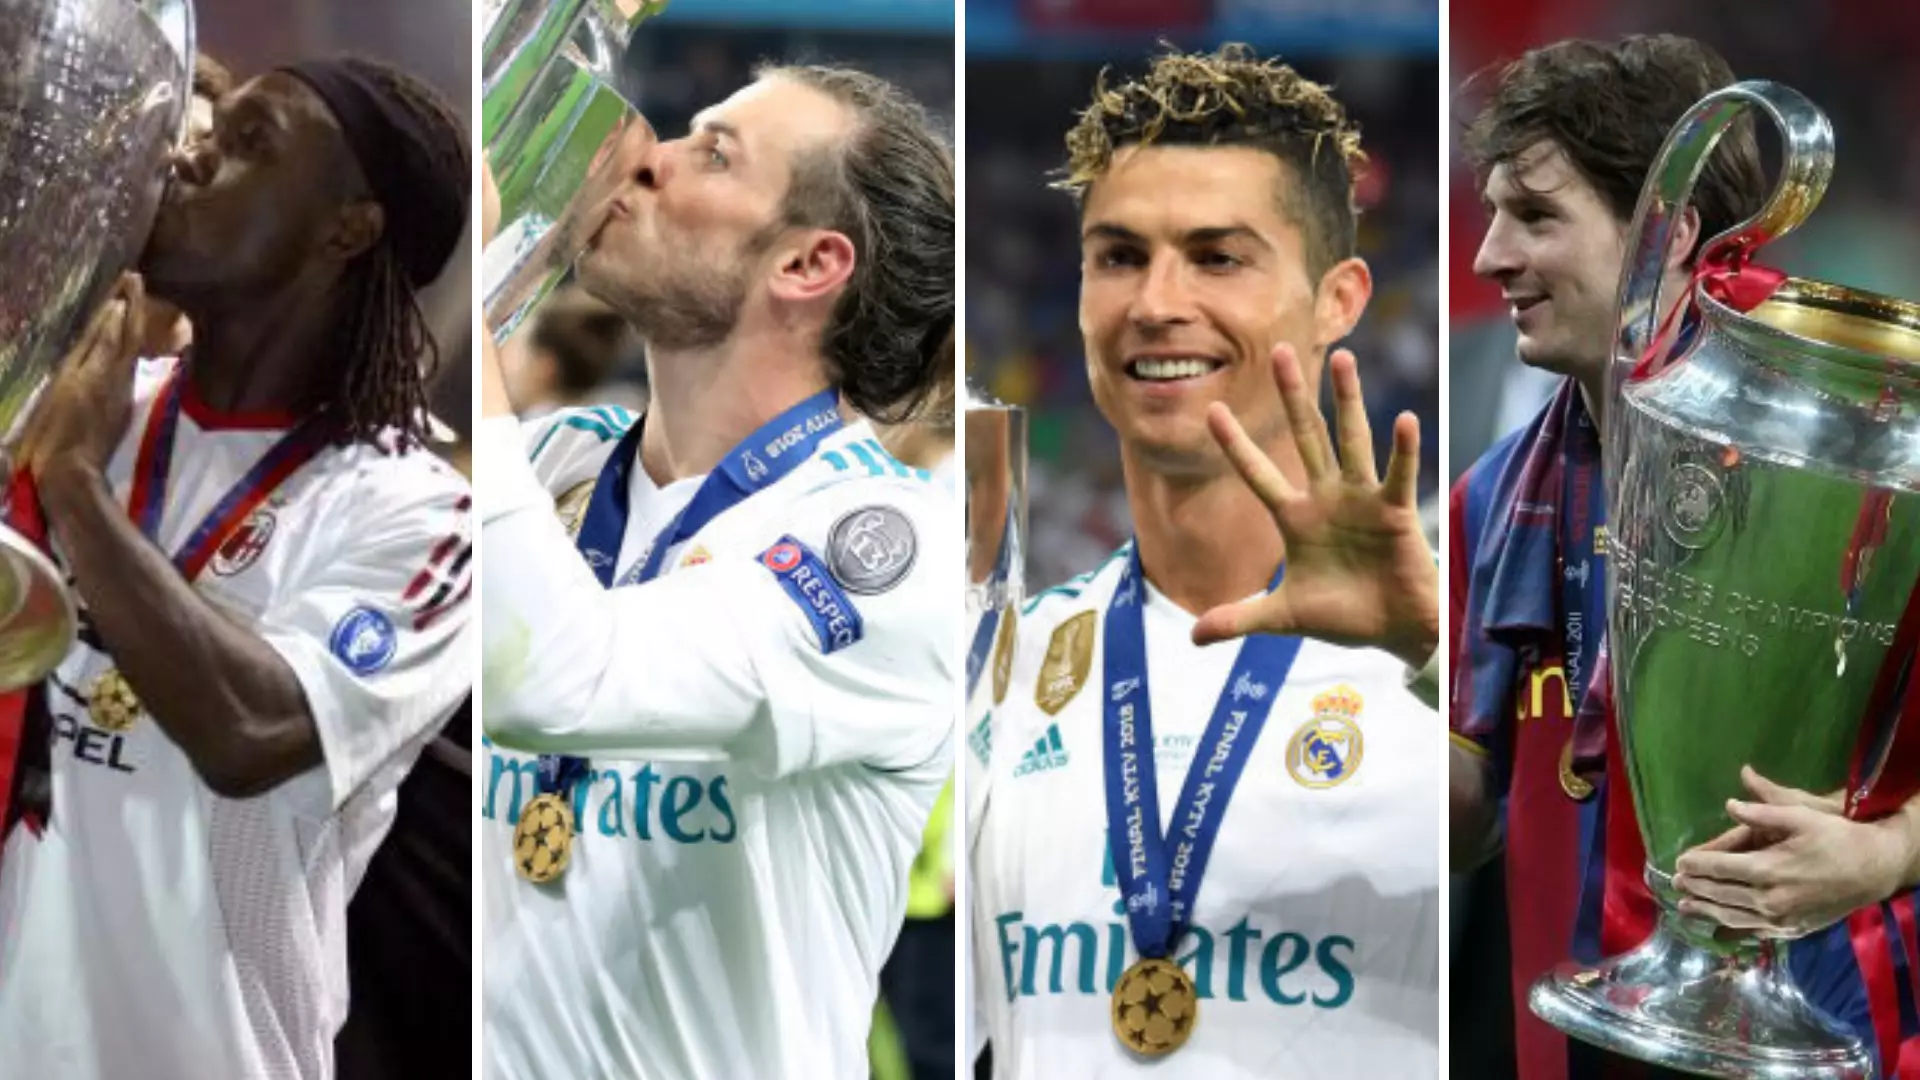 The 93 Players Who Have Won The Most Champions Leagues Titles In History Revealed